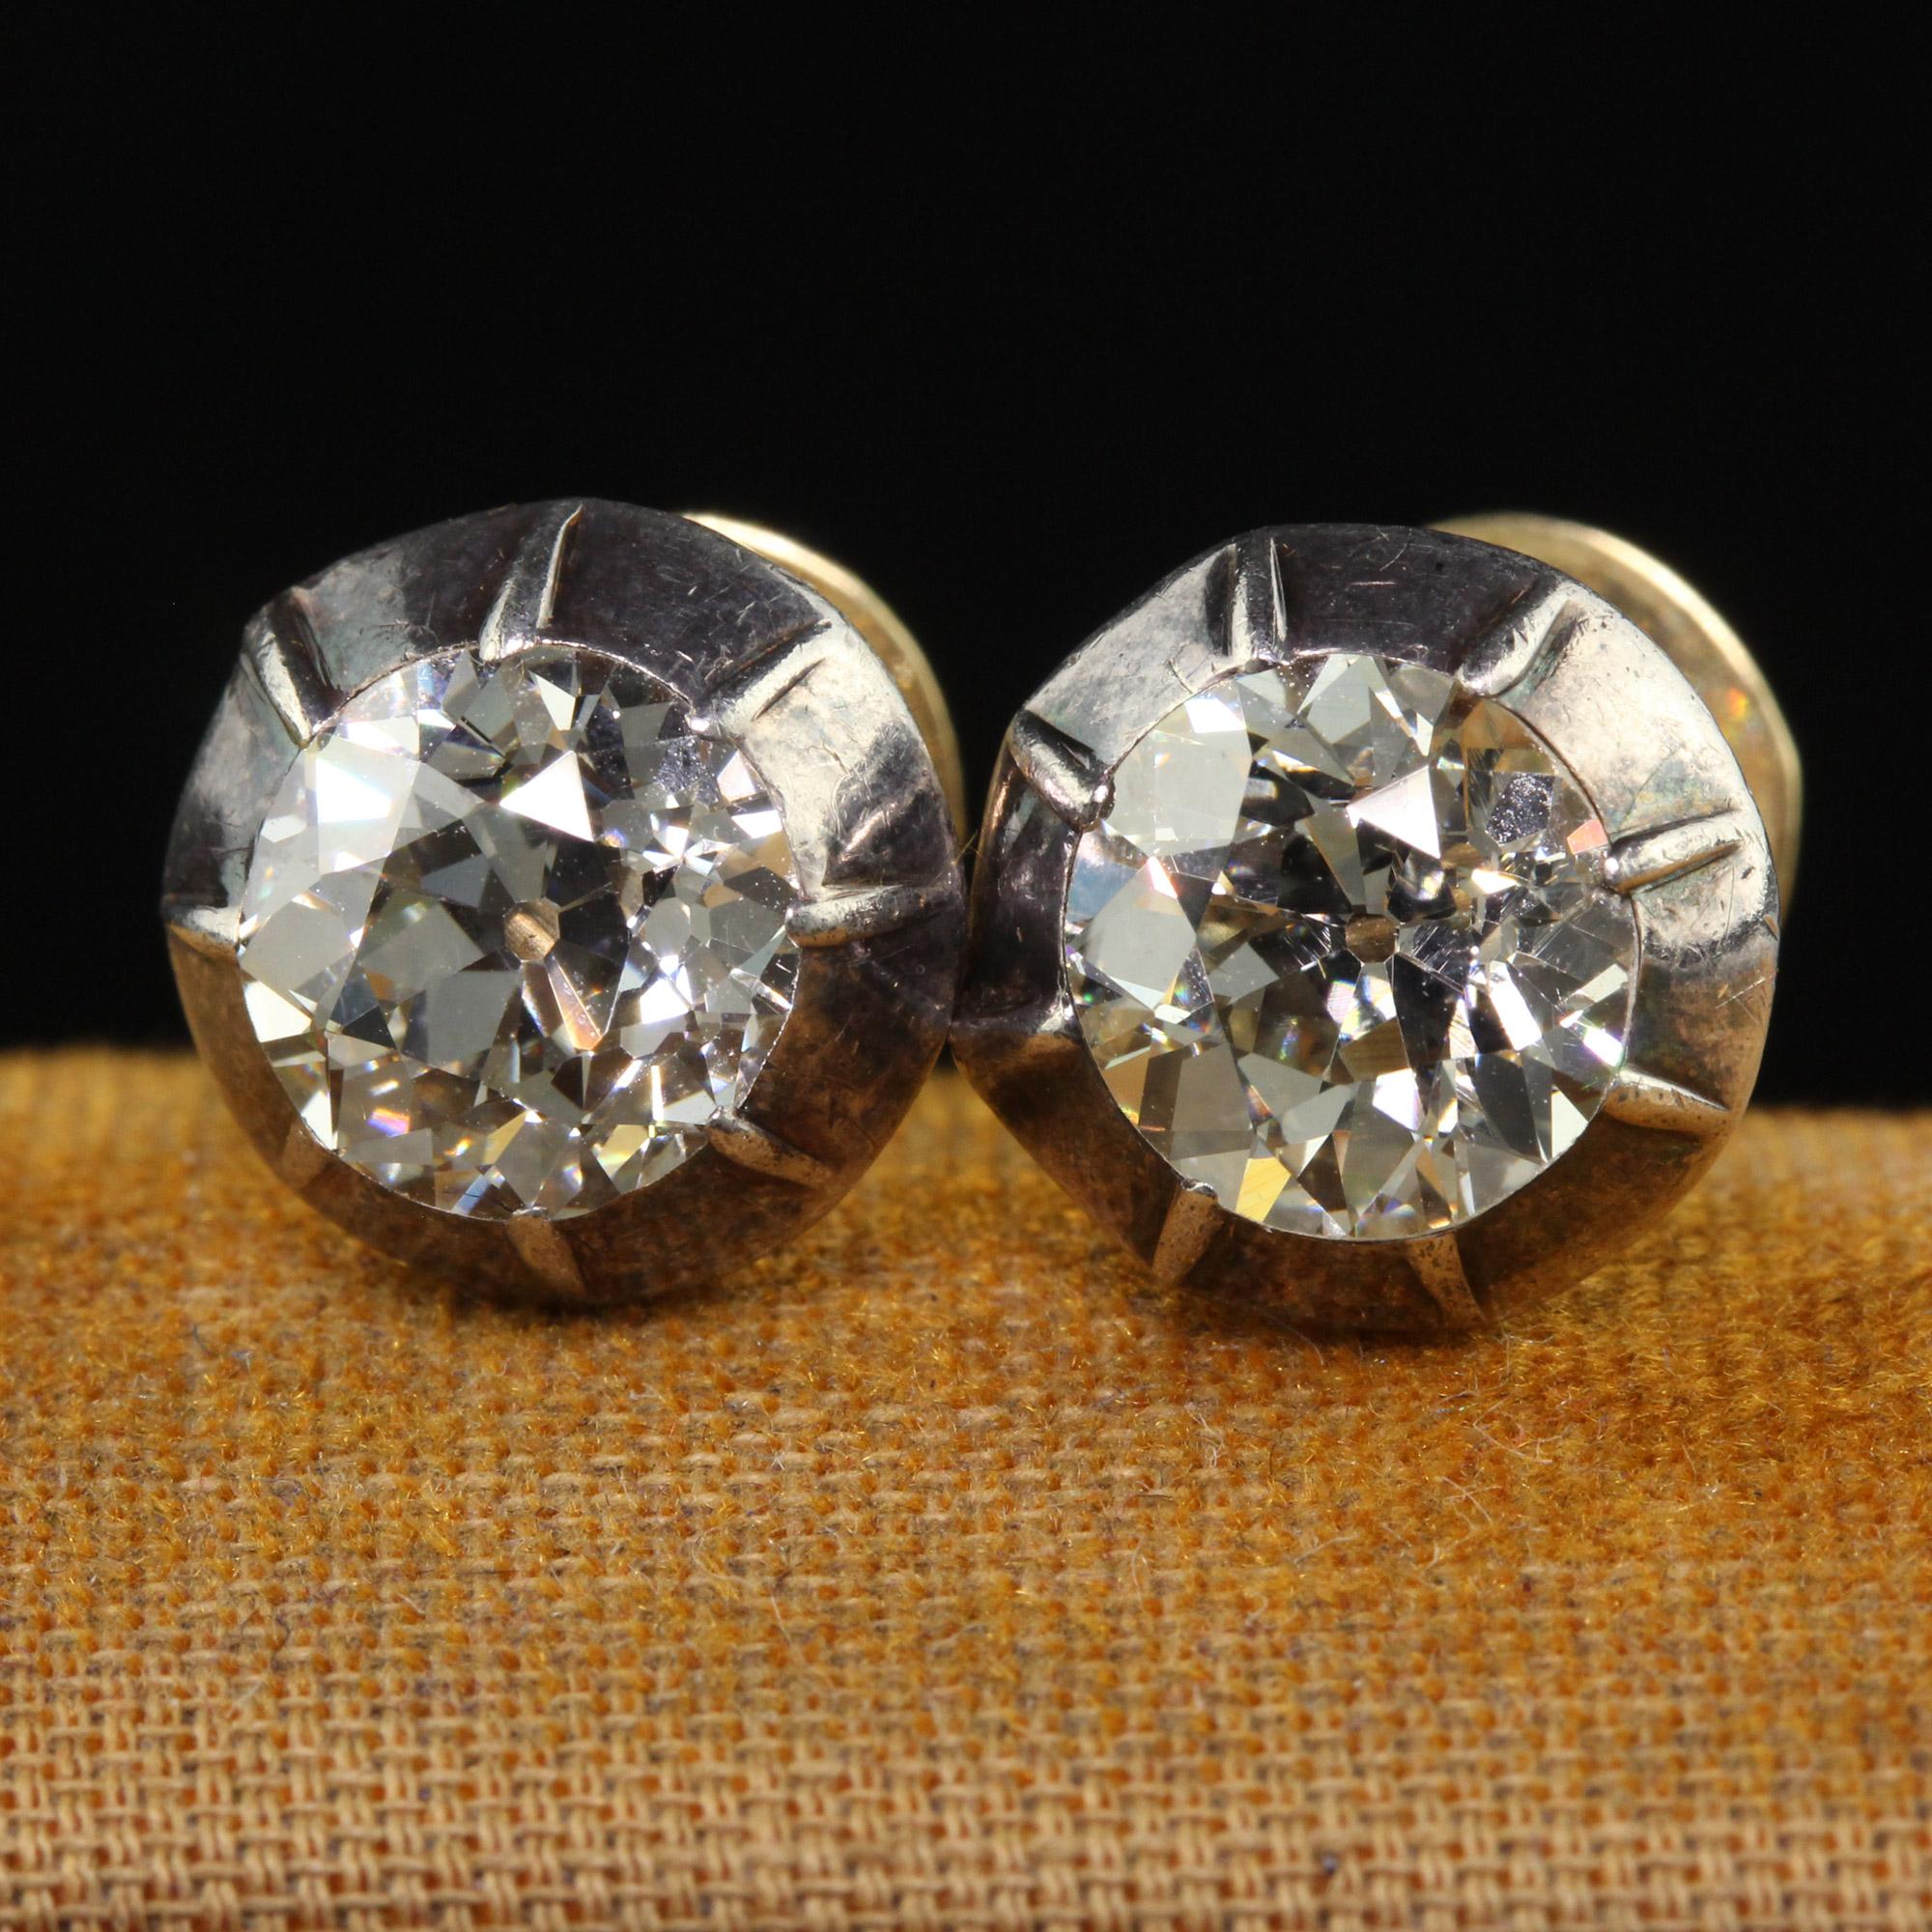 Beautiful Antique Georgian 18K Yellow Gold and Silver Top Old Mine Diamond Stud Earrings. This gorgeous pair of diamond studs are crafted in 18k yellow gold and silver. The stud earrings have two beautiful old cut diamonds set in a gorgeous mounting